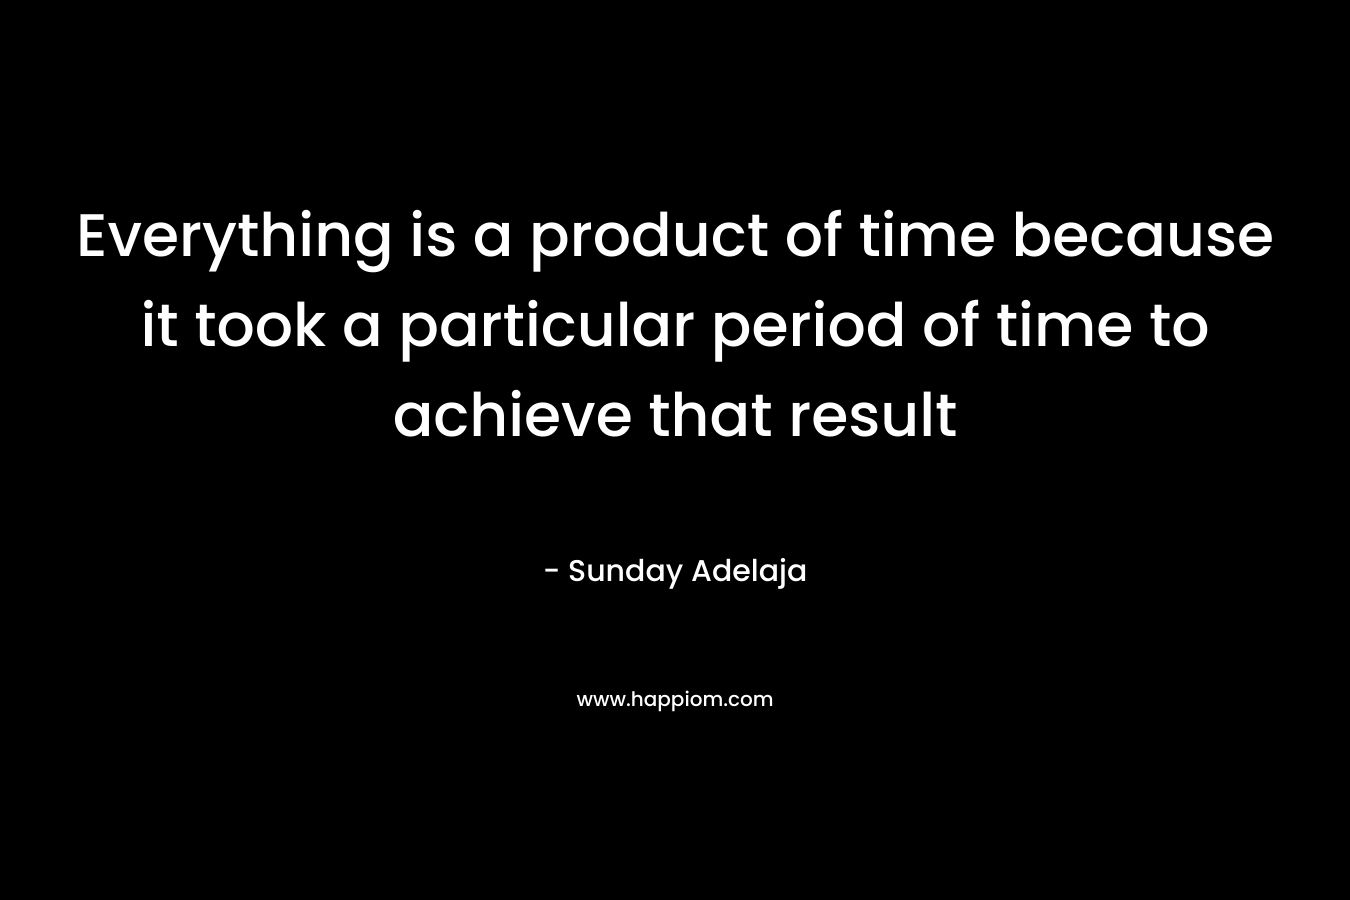 Everything is a product of time because it took a particular period of time to achieve that result